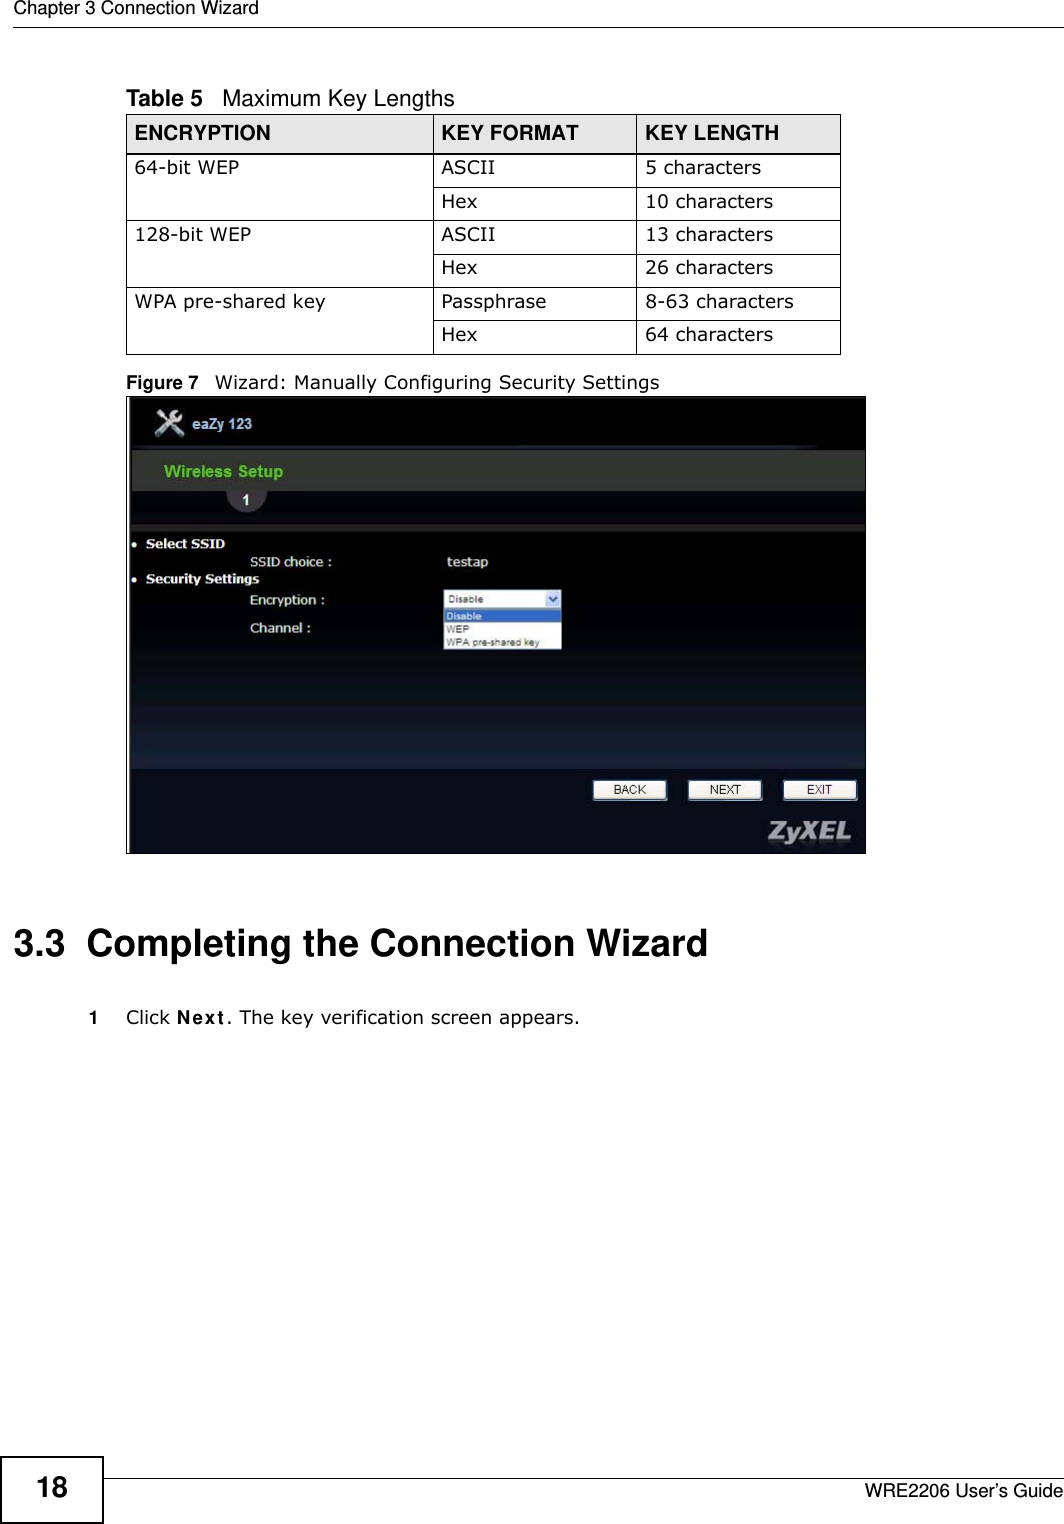 Chapter 3 Connection WizardWRE2206 User’s Guide18Figure 7   Wizard: Manually Configuring Security Settings3.3  Completing the Connection Wizard1Click N e x t . The key verification screen appears.Table 5   Maximum Key LengthsENCRYPTION KEY FORMAT KEY LENGTH64-bit WEP ASCII 5 charactersHex 10 characters128-bit WEP ASCII 13 charactersHex 26 charactersWPA pre-shared key Passphrase 8-63 charactersHex 64 characters